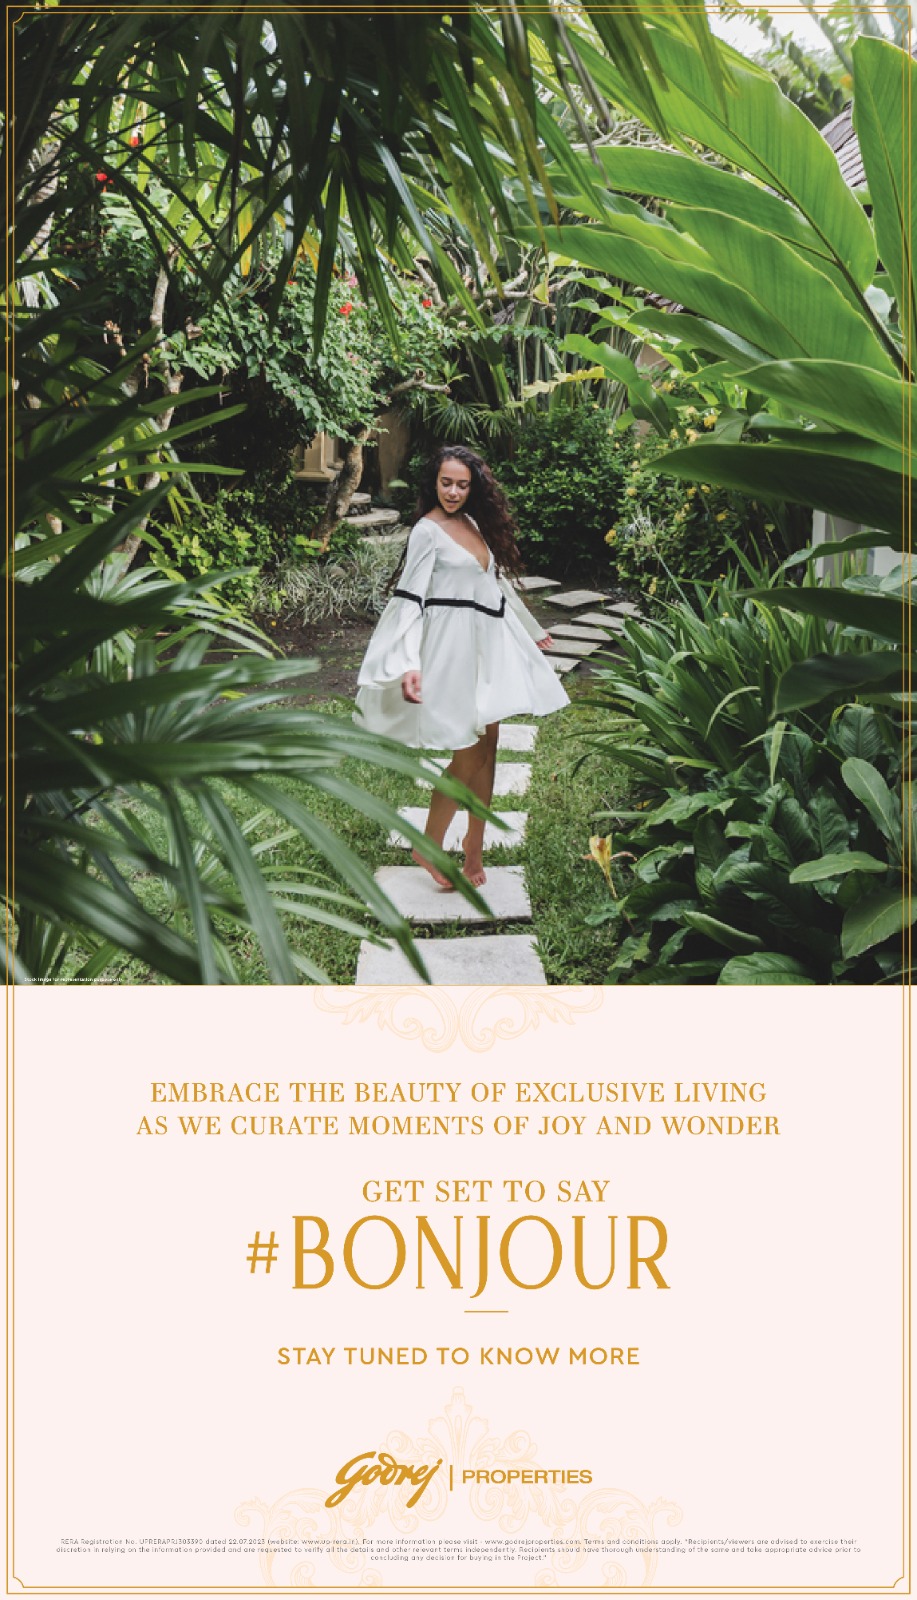 Introducing a Slice of Paradise: Godrej Properties Invites You to Say #BONJOUR to Luxurious Living Update